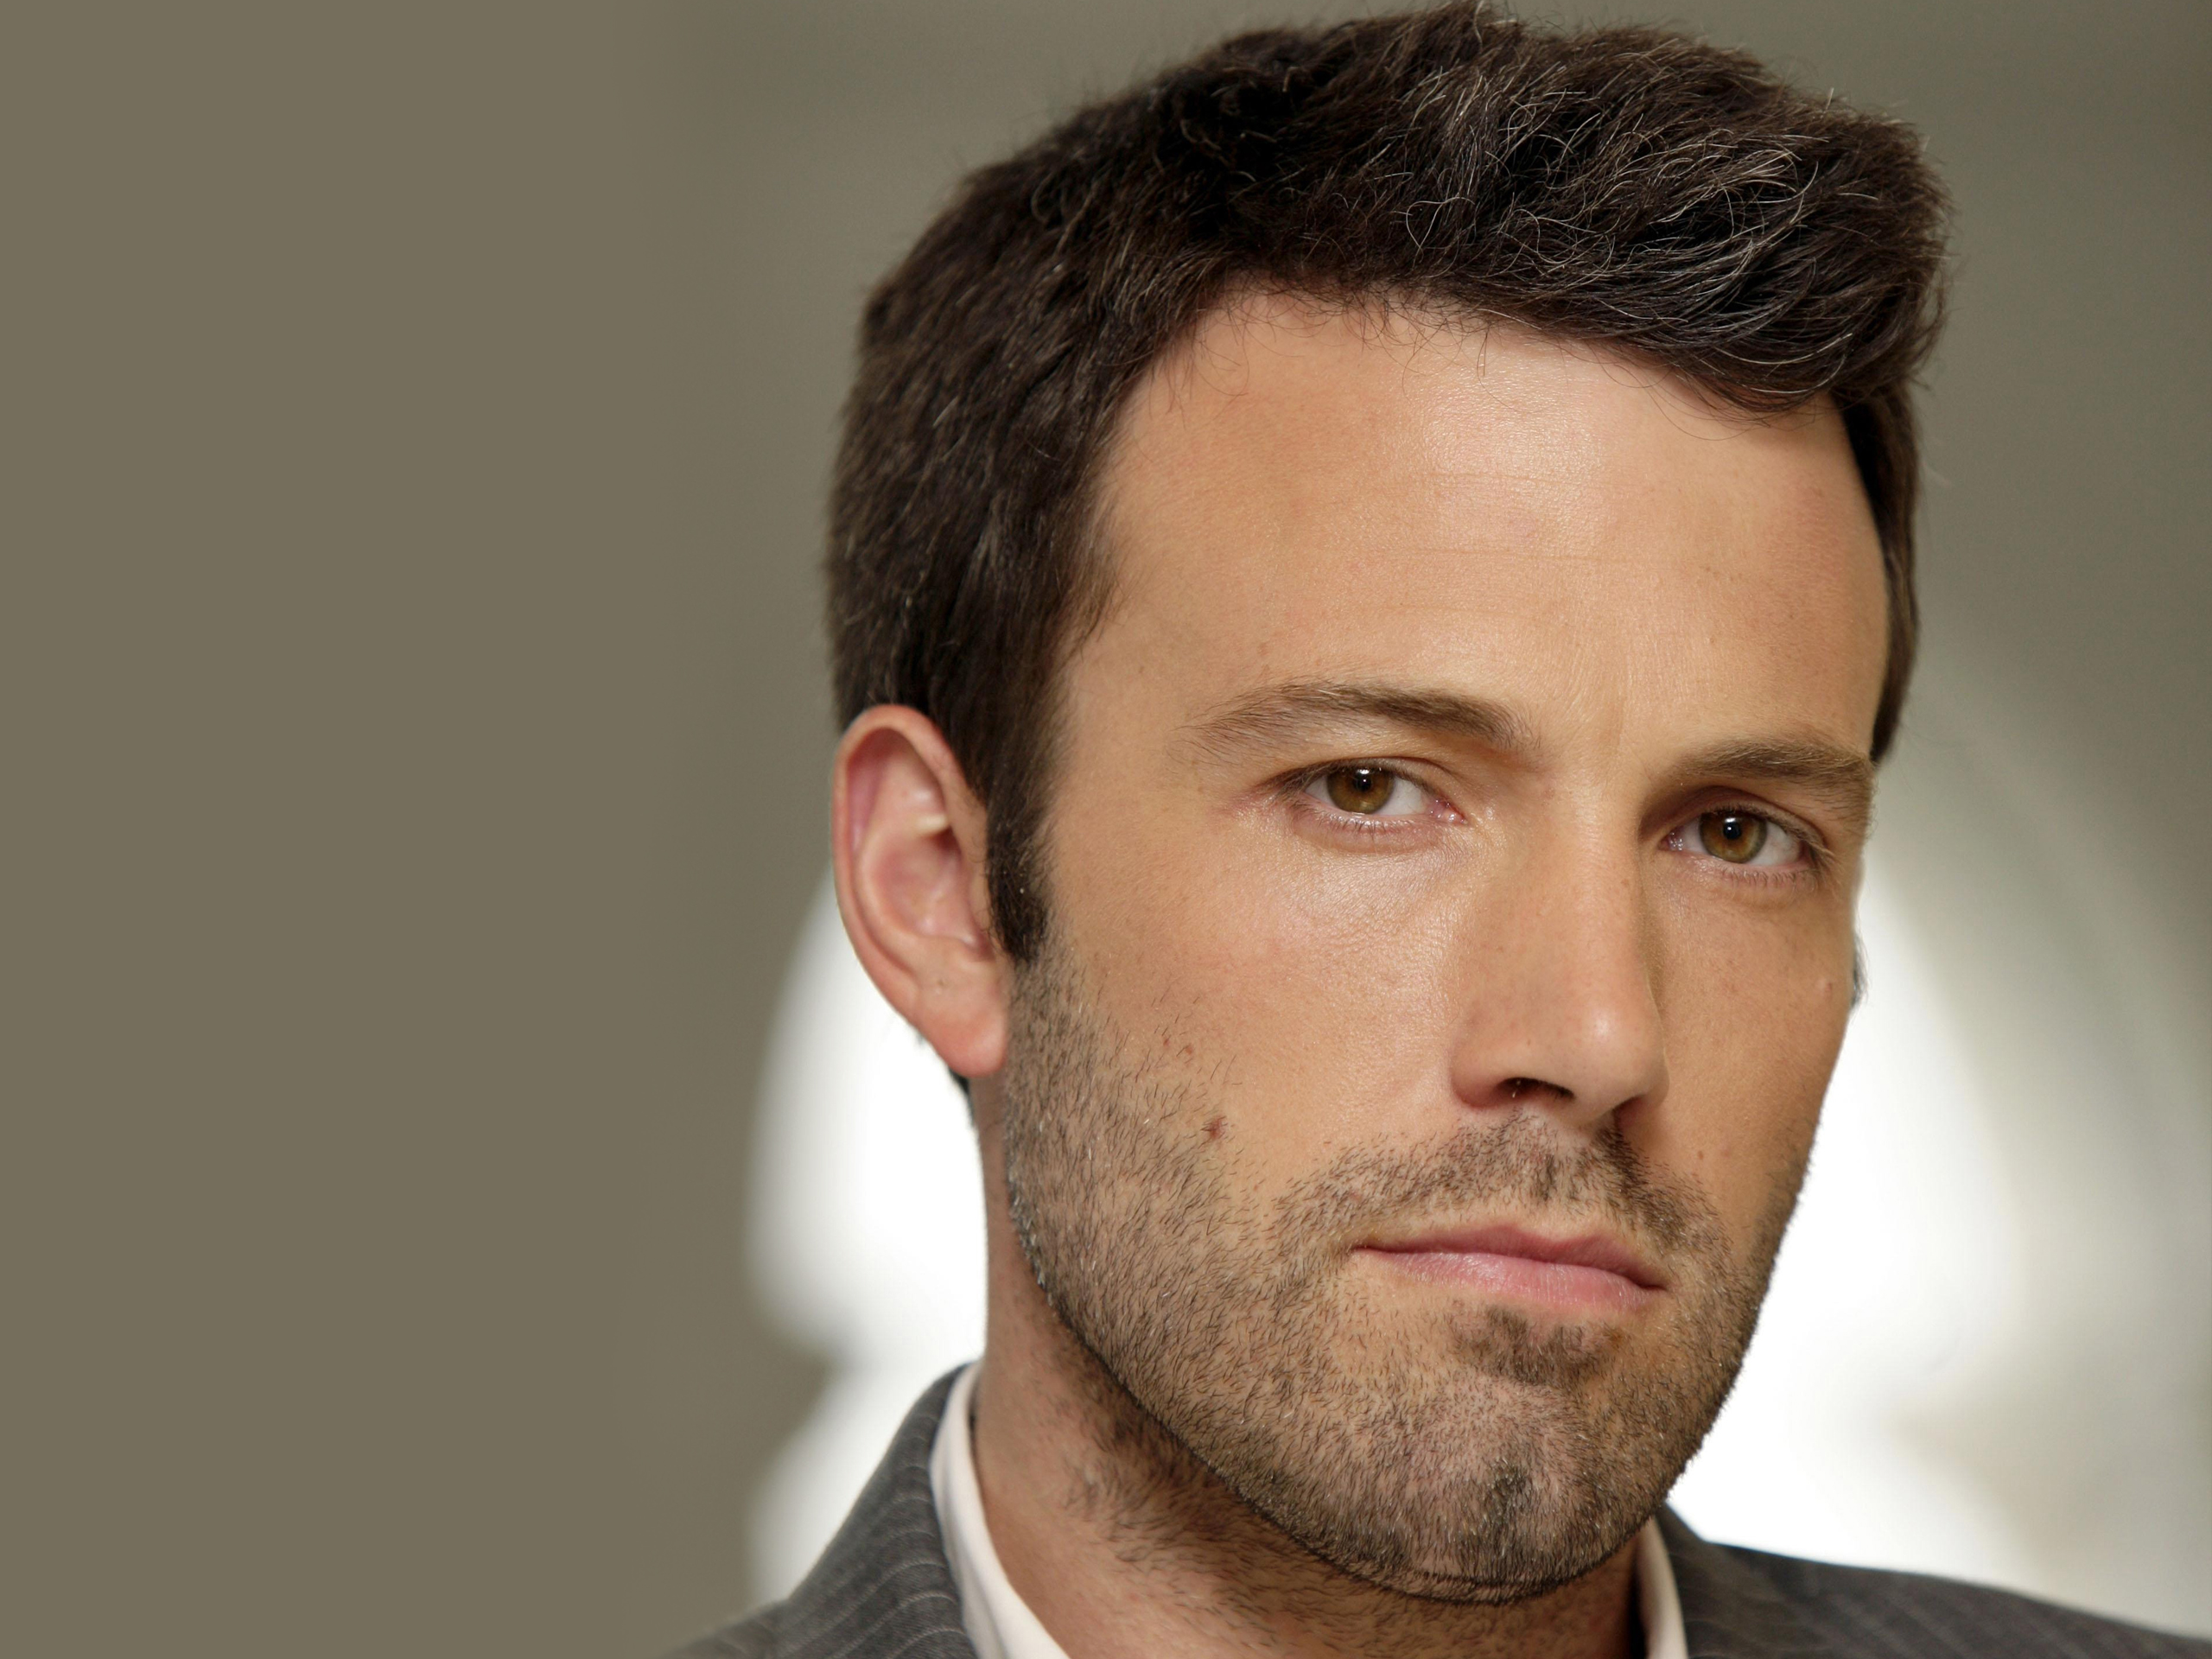 28/05/2008 - Ben Affleck during a photocall for 'Gone Baby Gone', at the Mandarin Oriental hotel in west London.